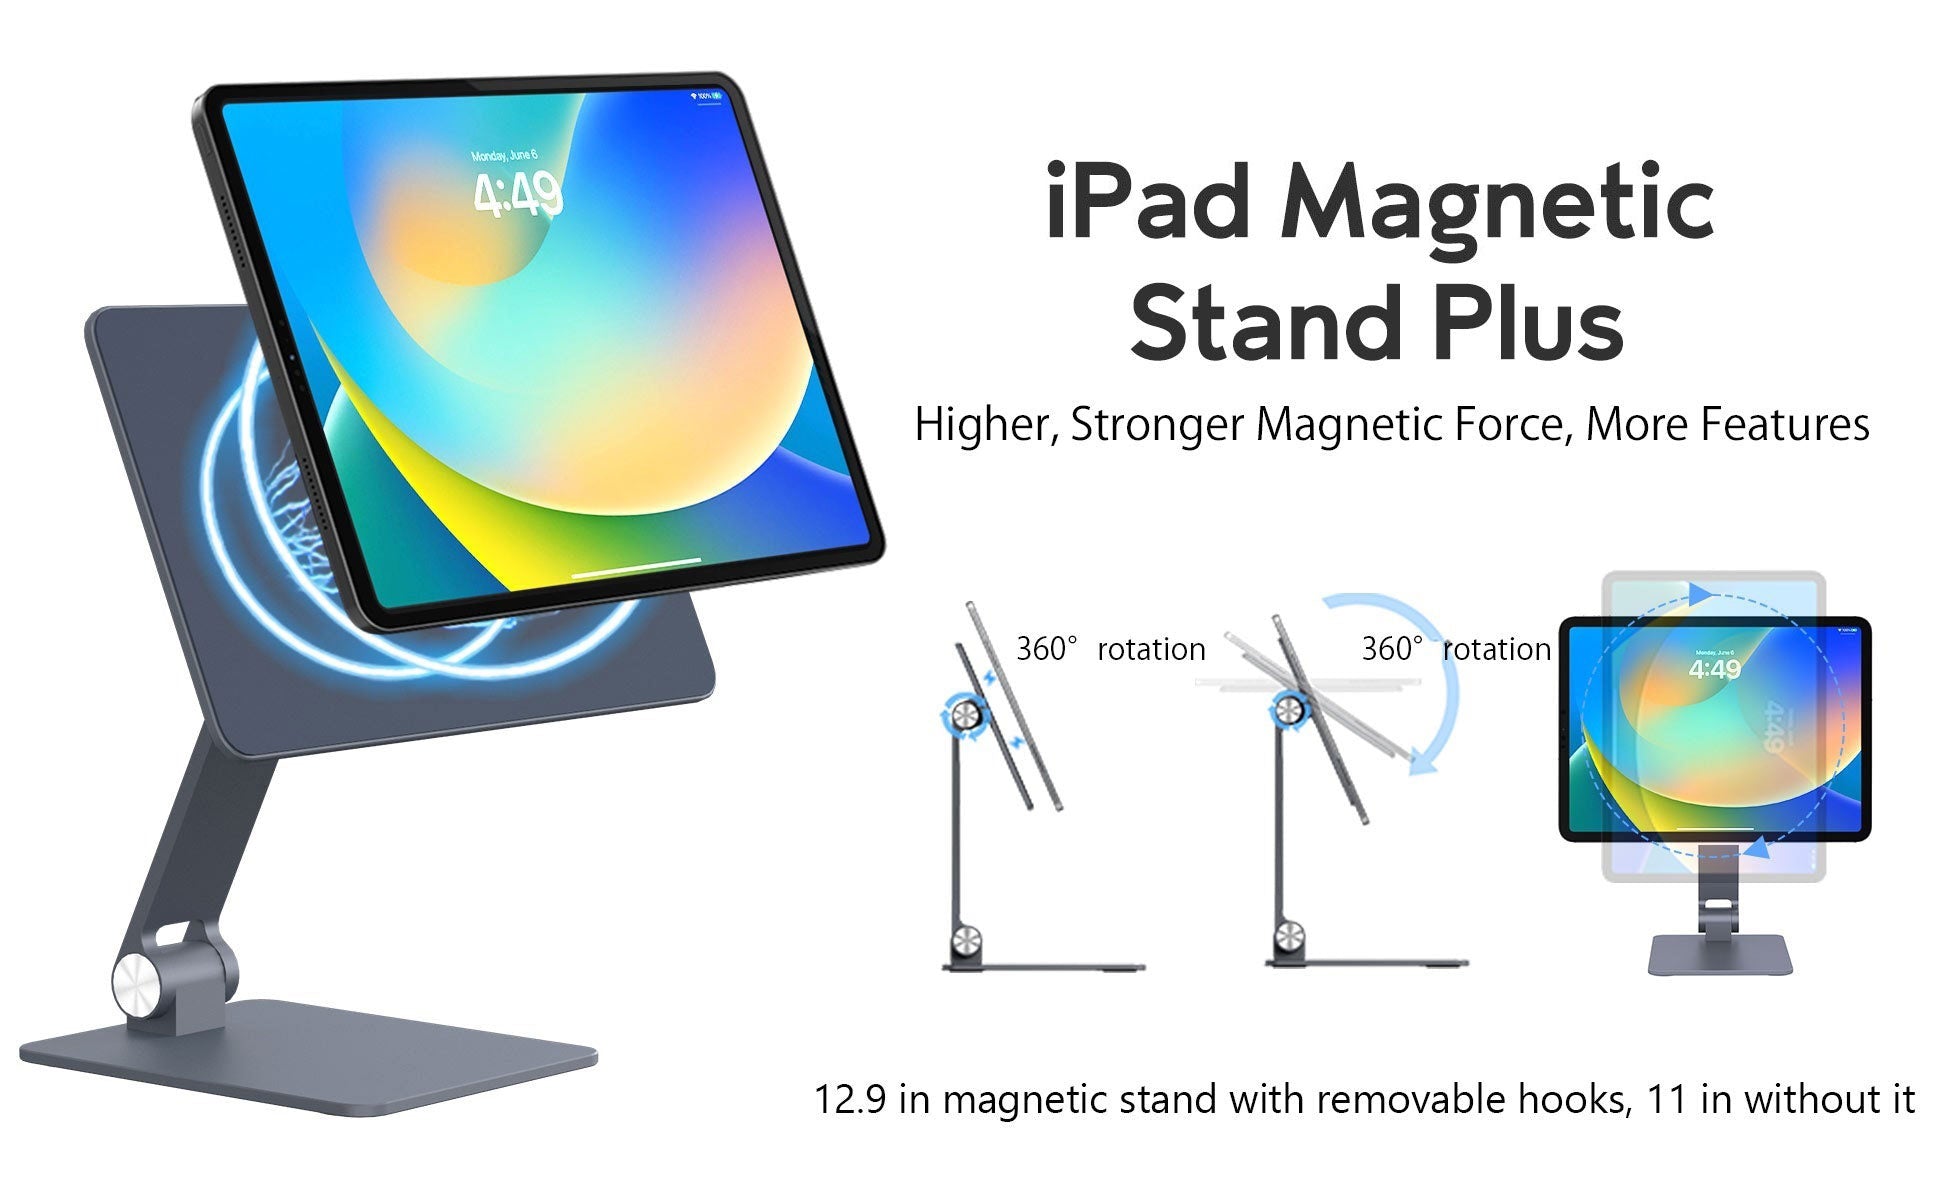 ipad-magnetic-stand-more-perfect-ipad-magnetic-stand-for-your-ipad-proair5-air4-magfit-ipad-magnetic-stand-plus[1]